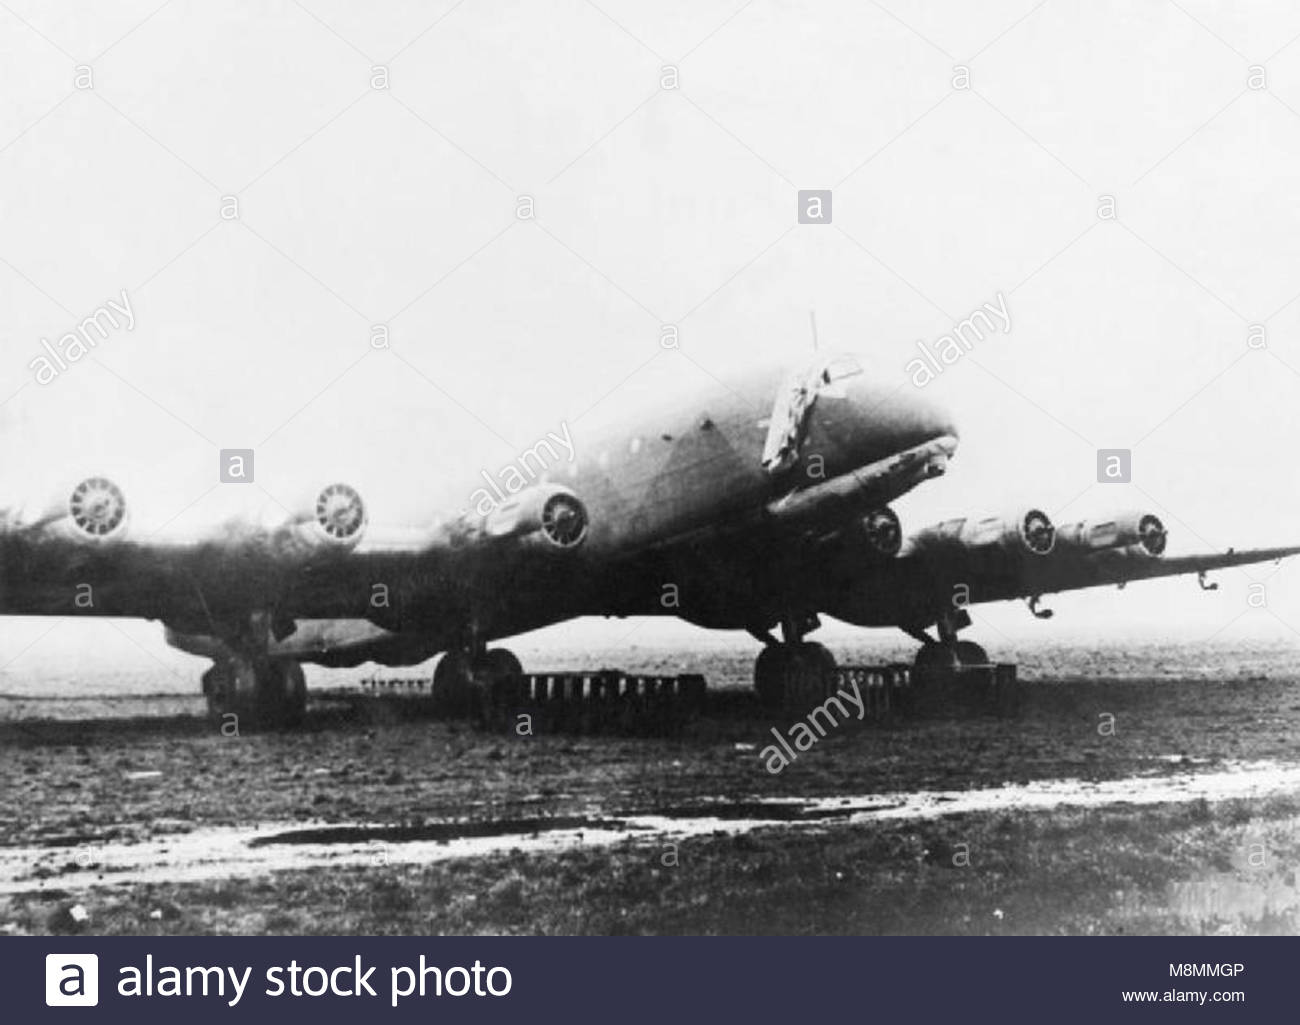 ju-390-transport-with-six-bmw-801-engines-pictured-abandoned-on-a-M8MMGP.jpg